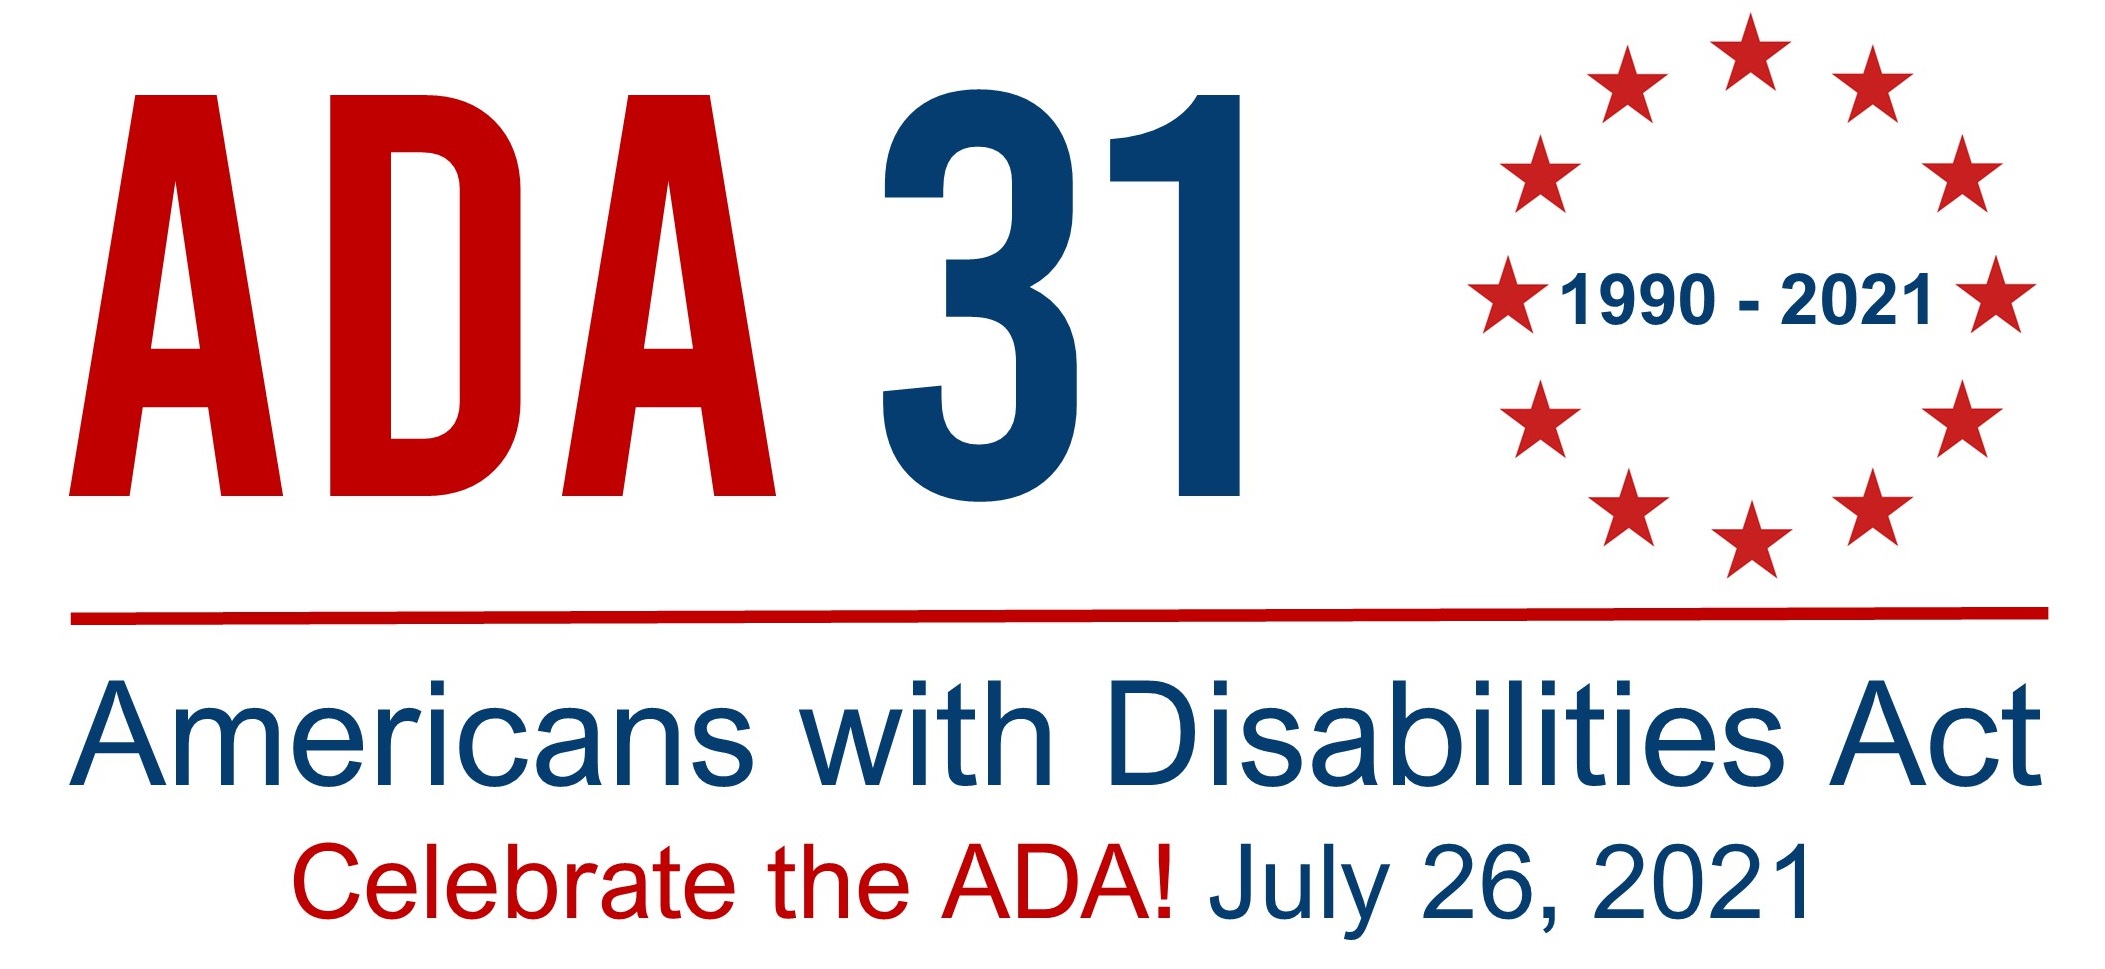 Celebrating 31 years since the passing of the Americans with Disabilities Act